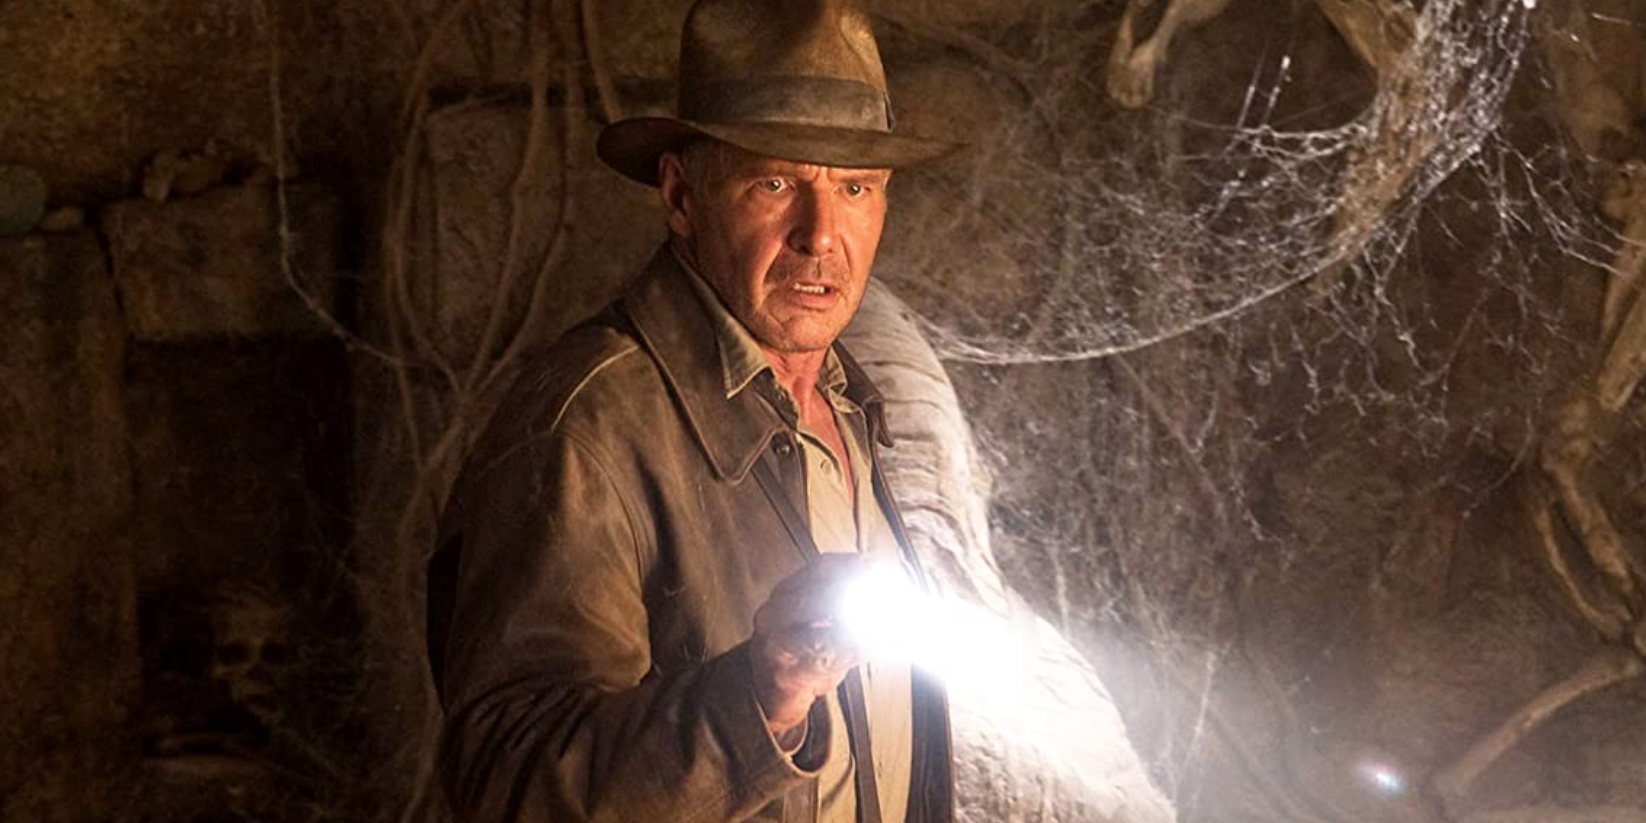 Indiana-Jones-and-the-Kingdom-of-the-Crystal-Skull-Harrison-Ford